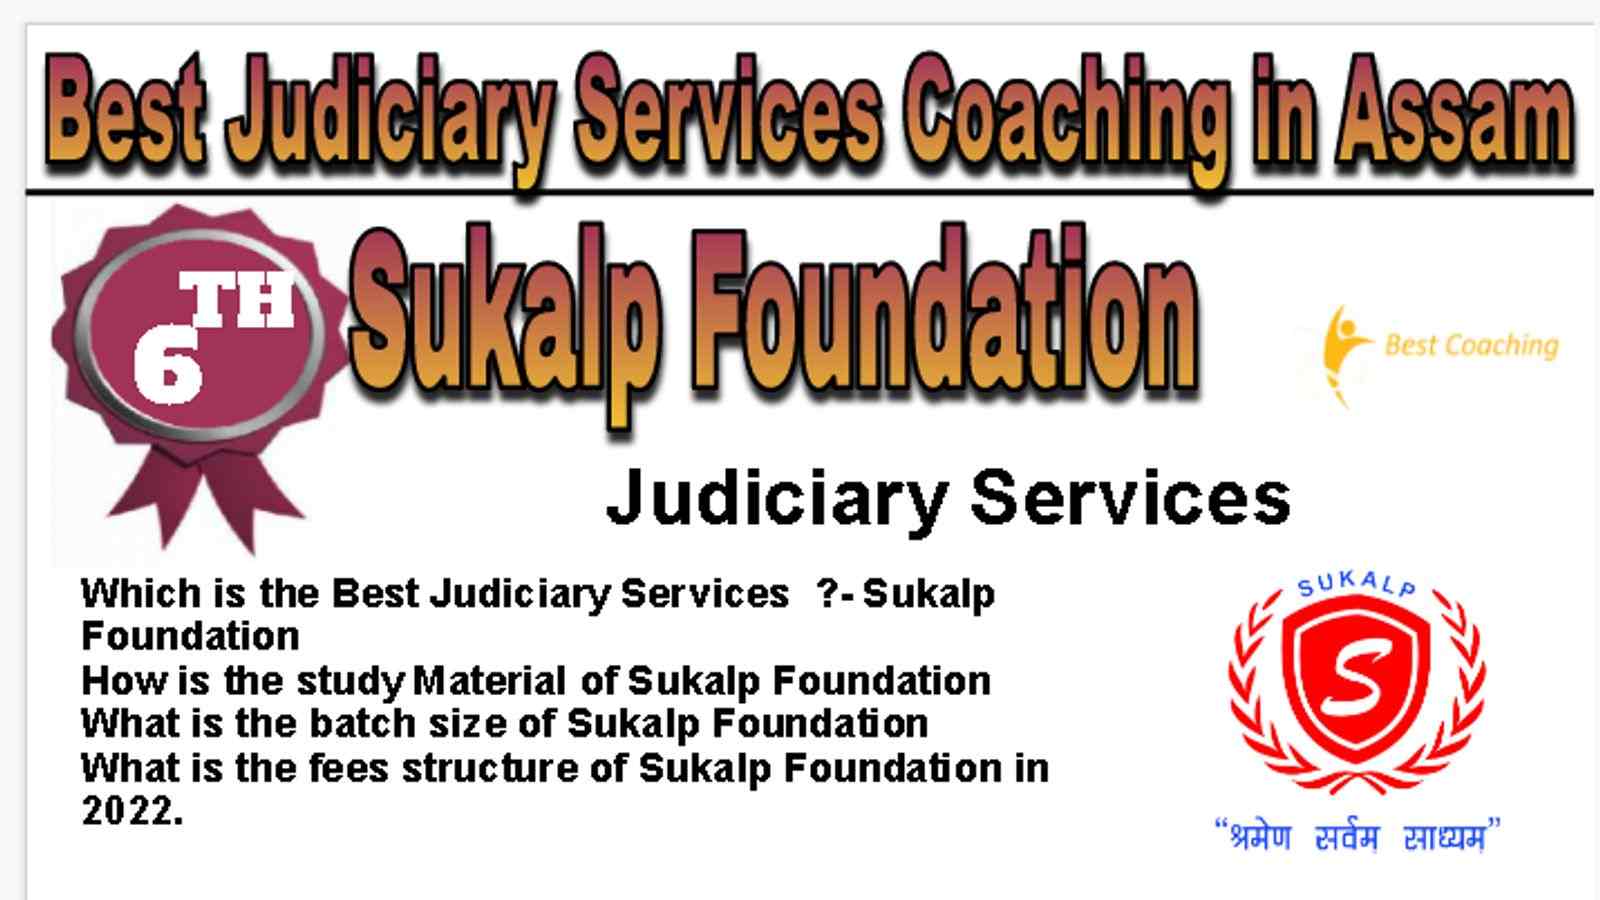 Rank 6 Best Judiciary Services Coaching in Assam